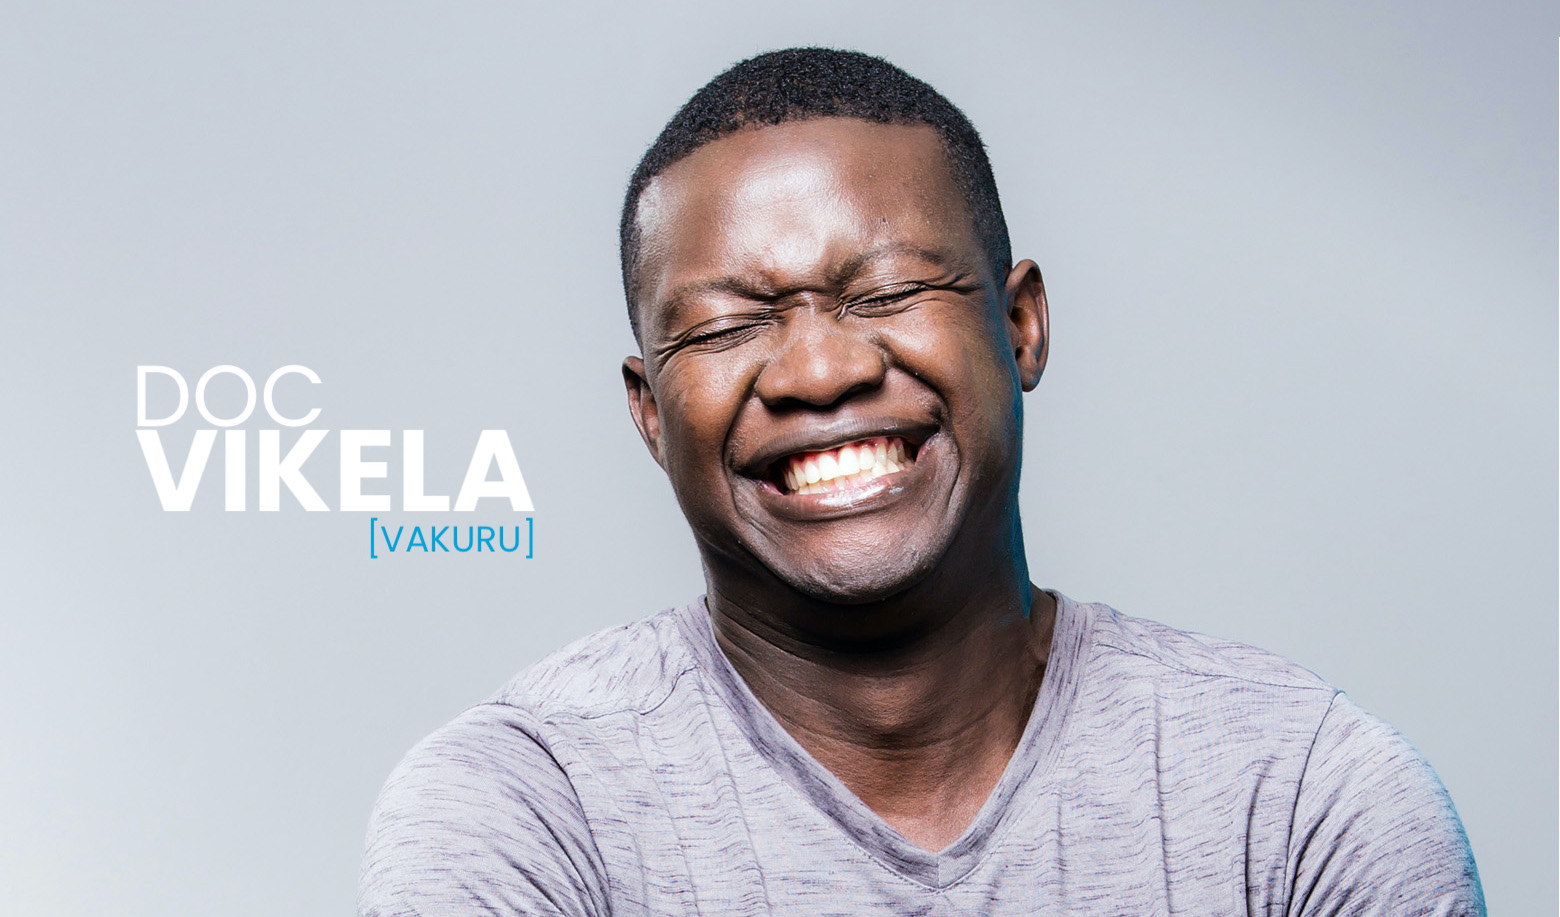 AFRICAN STAND-UP COMEDIANS COME TOGETHER DURING THE FIRST VIRTUAL SIMUKA COMEDY FESTIVAL